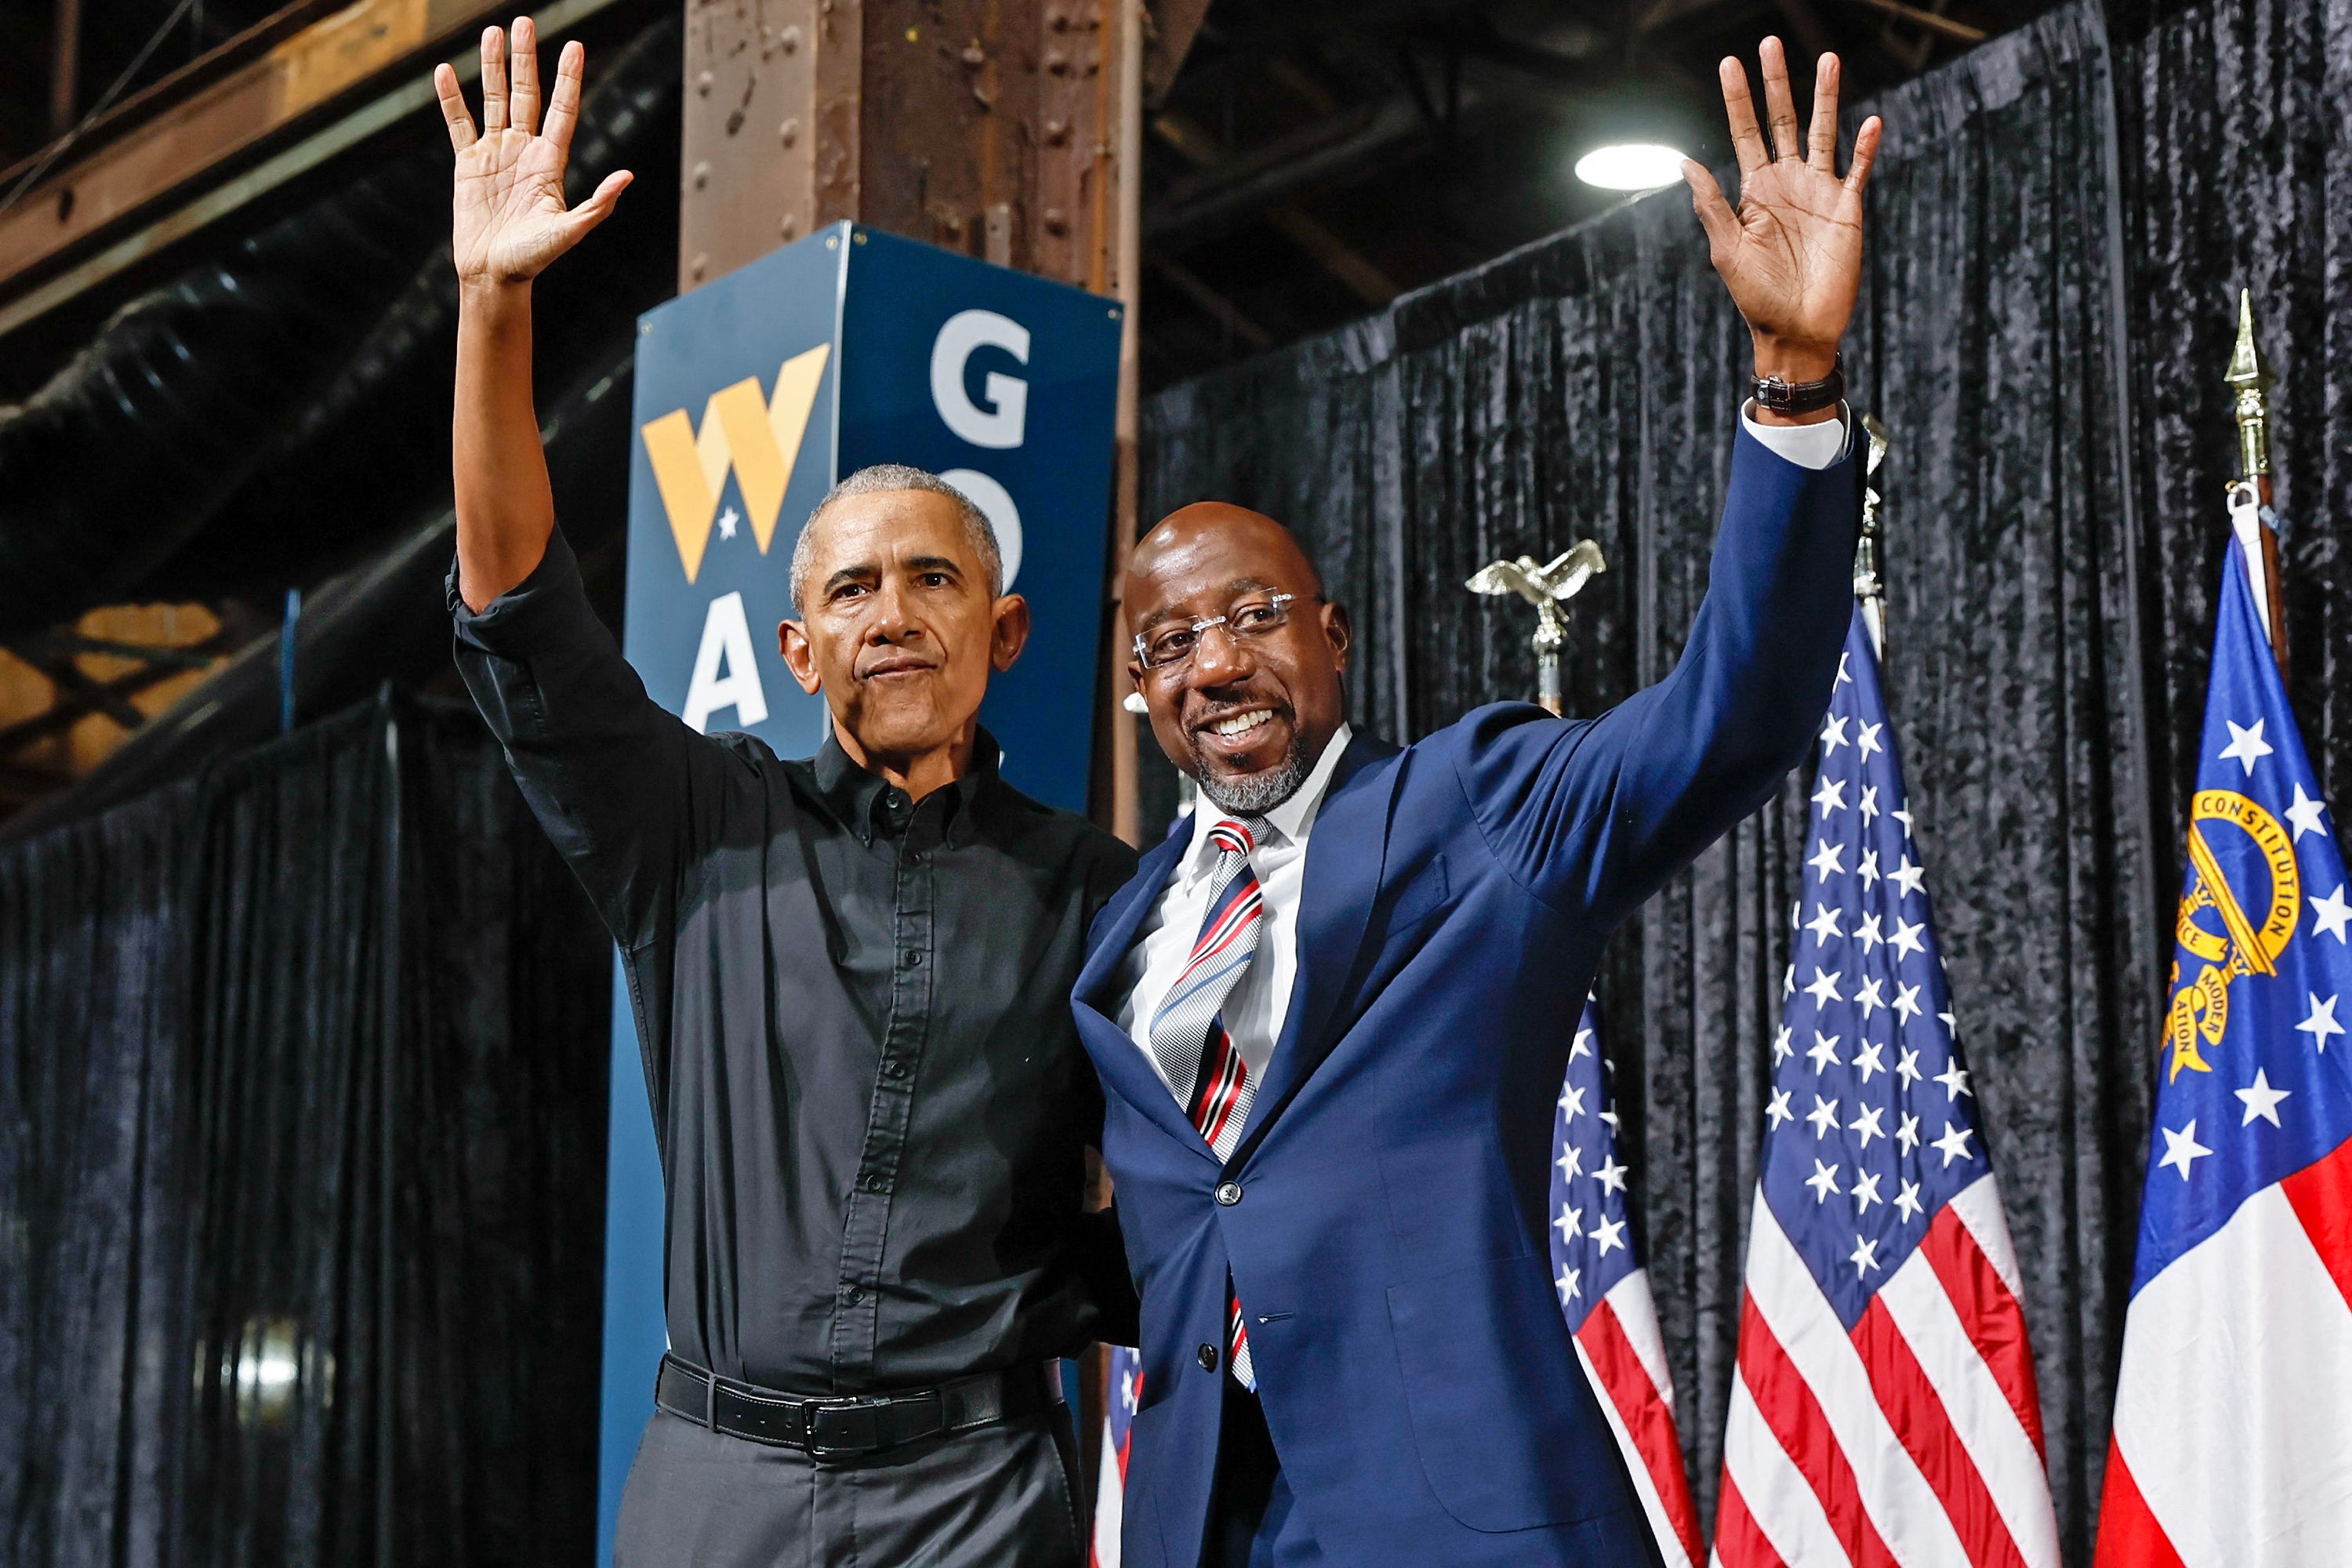 Two men wave from a stage.